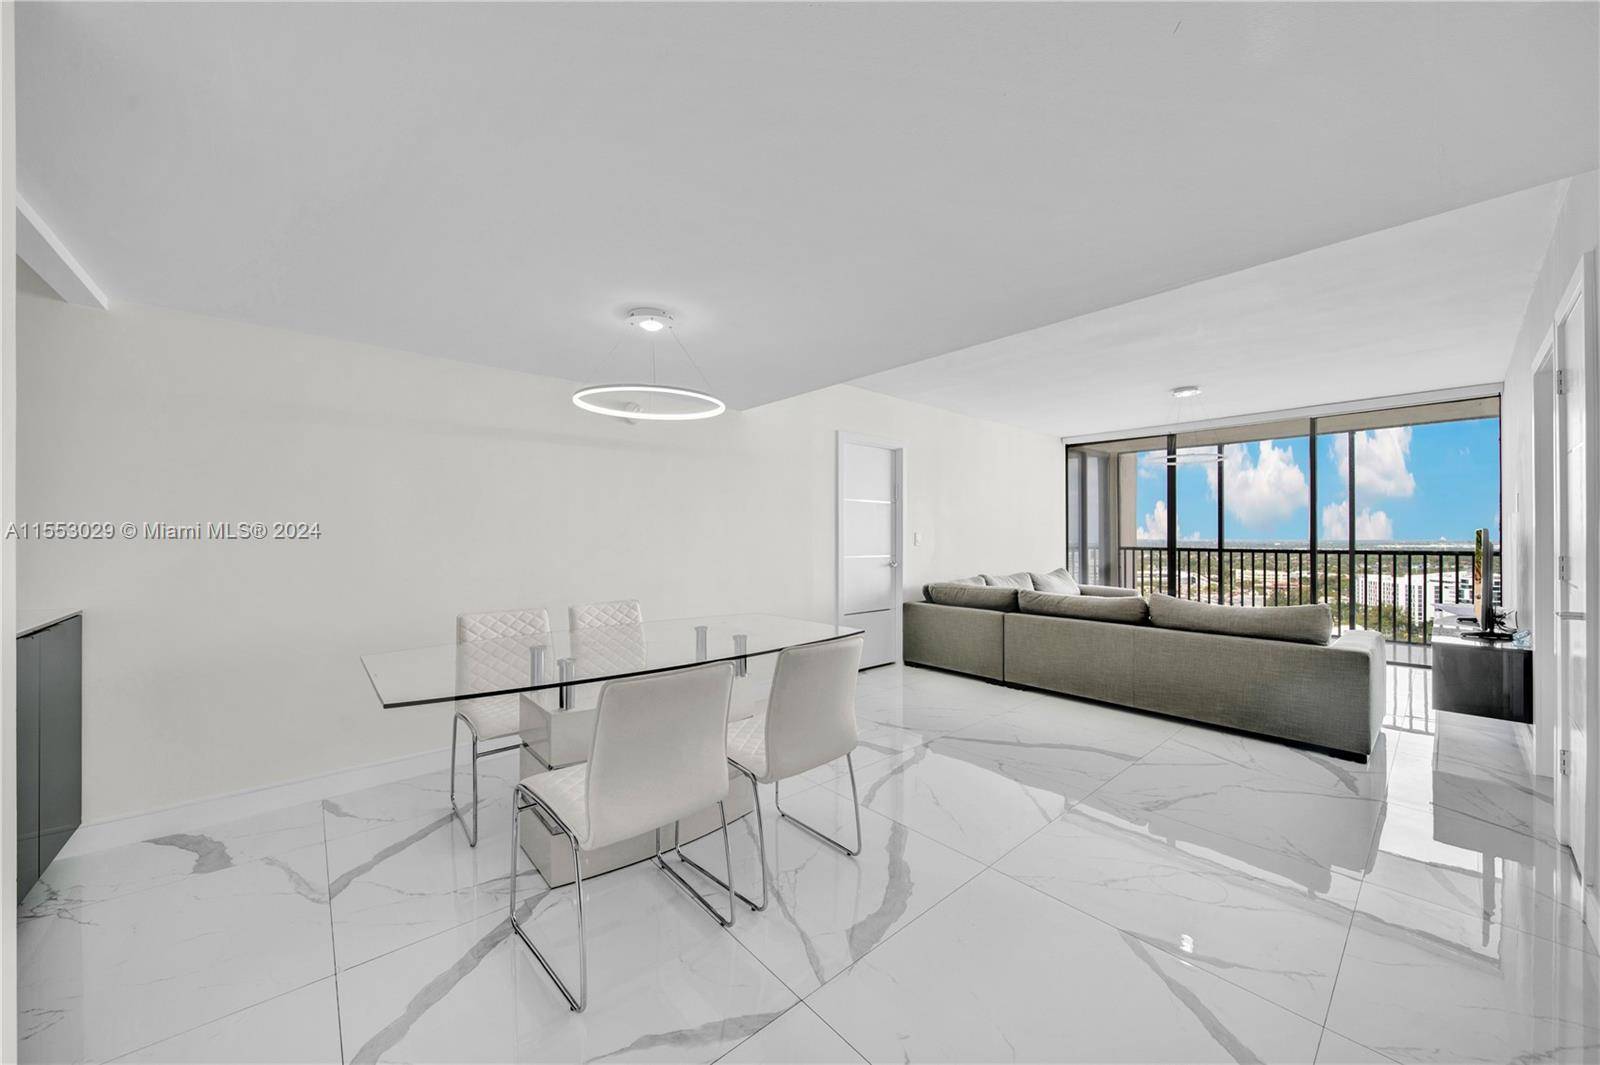 Welcome to your dream home in the heart of Aventura, Florida.